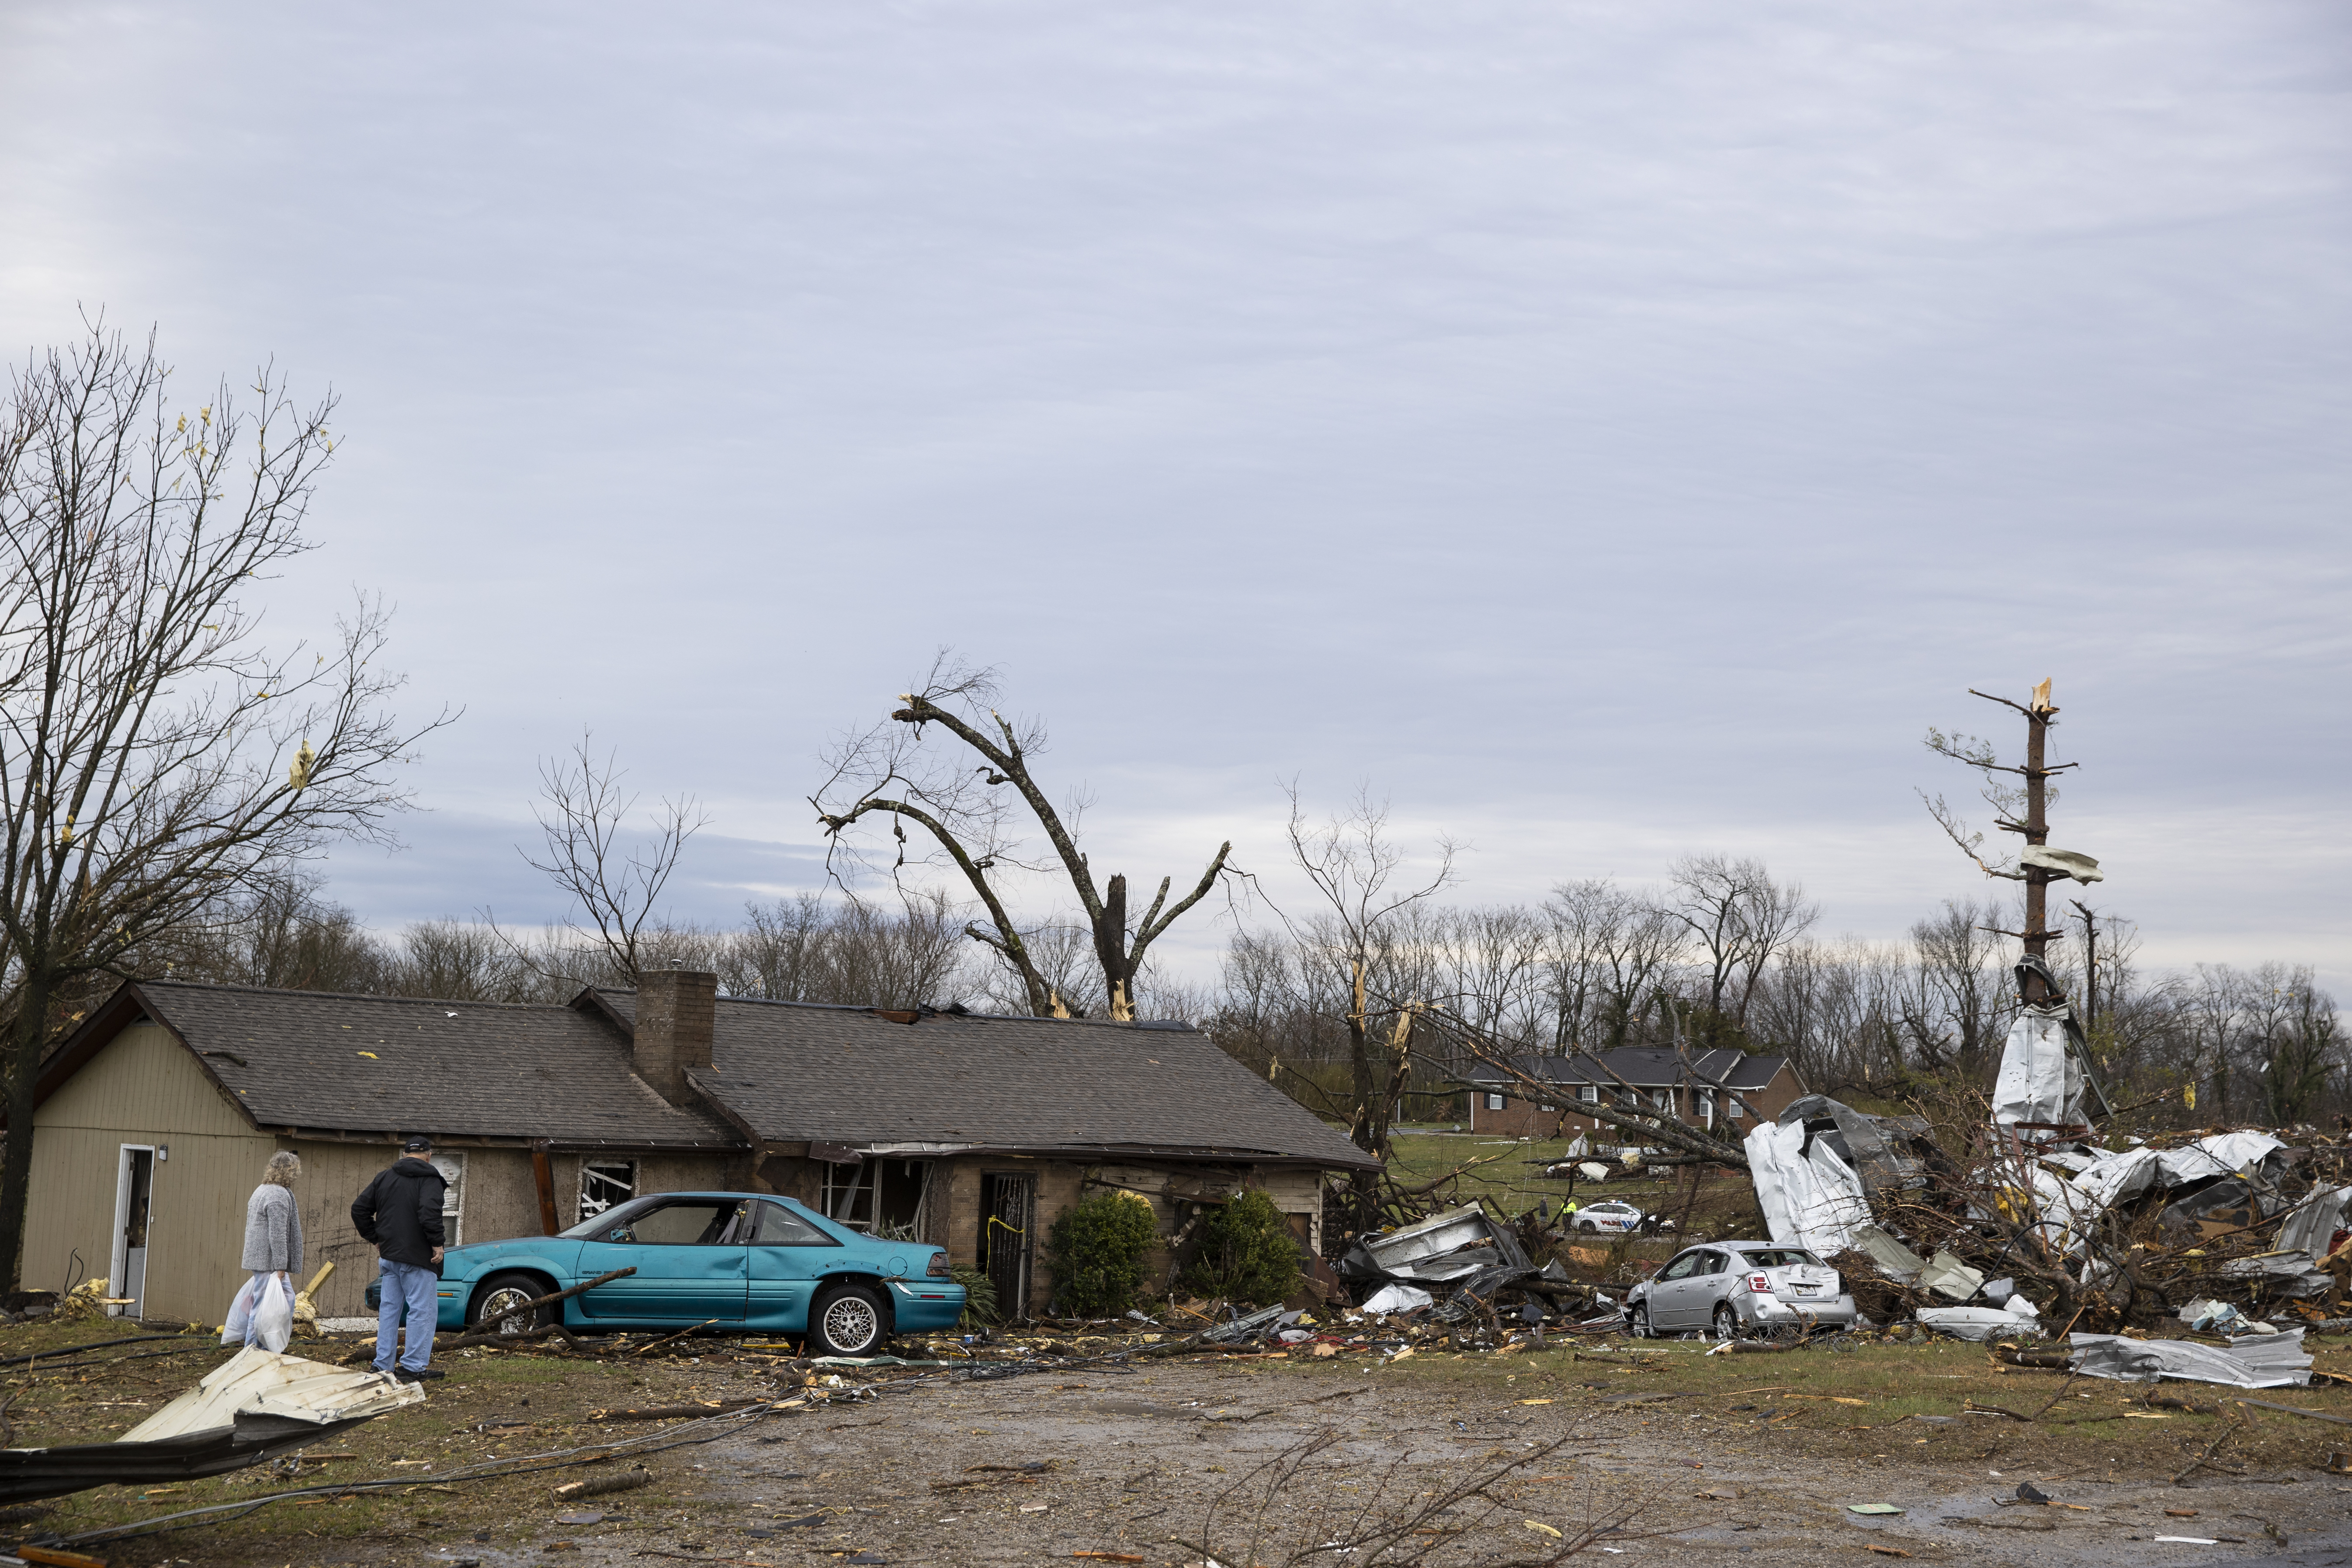 Lavern and Judy Hix survey their home, damaged by high winds from one of several tornadoes that tore through the state overnight on March 3, 2020 in Cookeville, Tennessee. (Photo by Brett Carlsen/Getty Images)